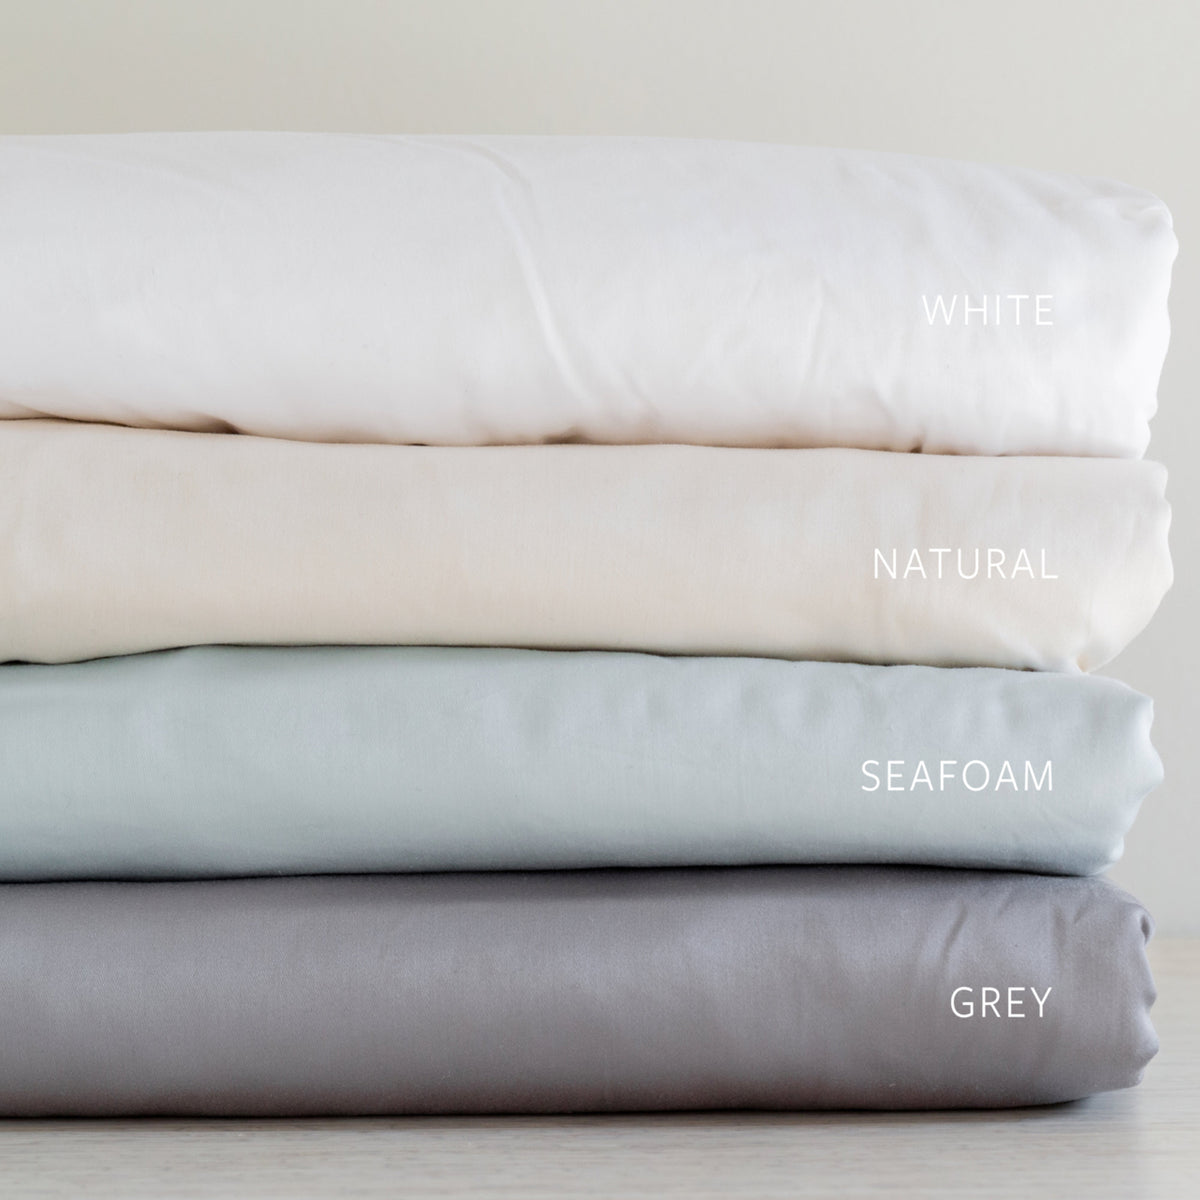 Brentwood Home Organic Cotton Sheets best softest supersoft